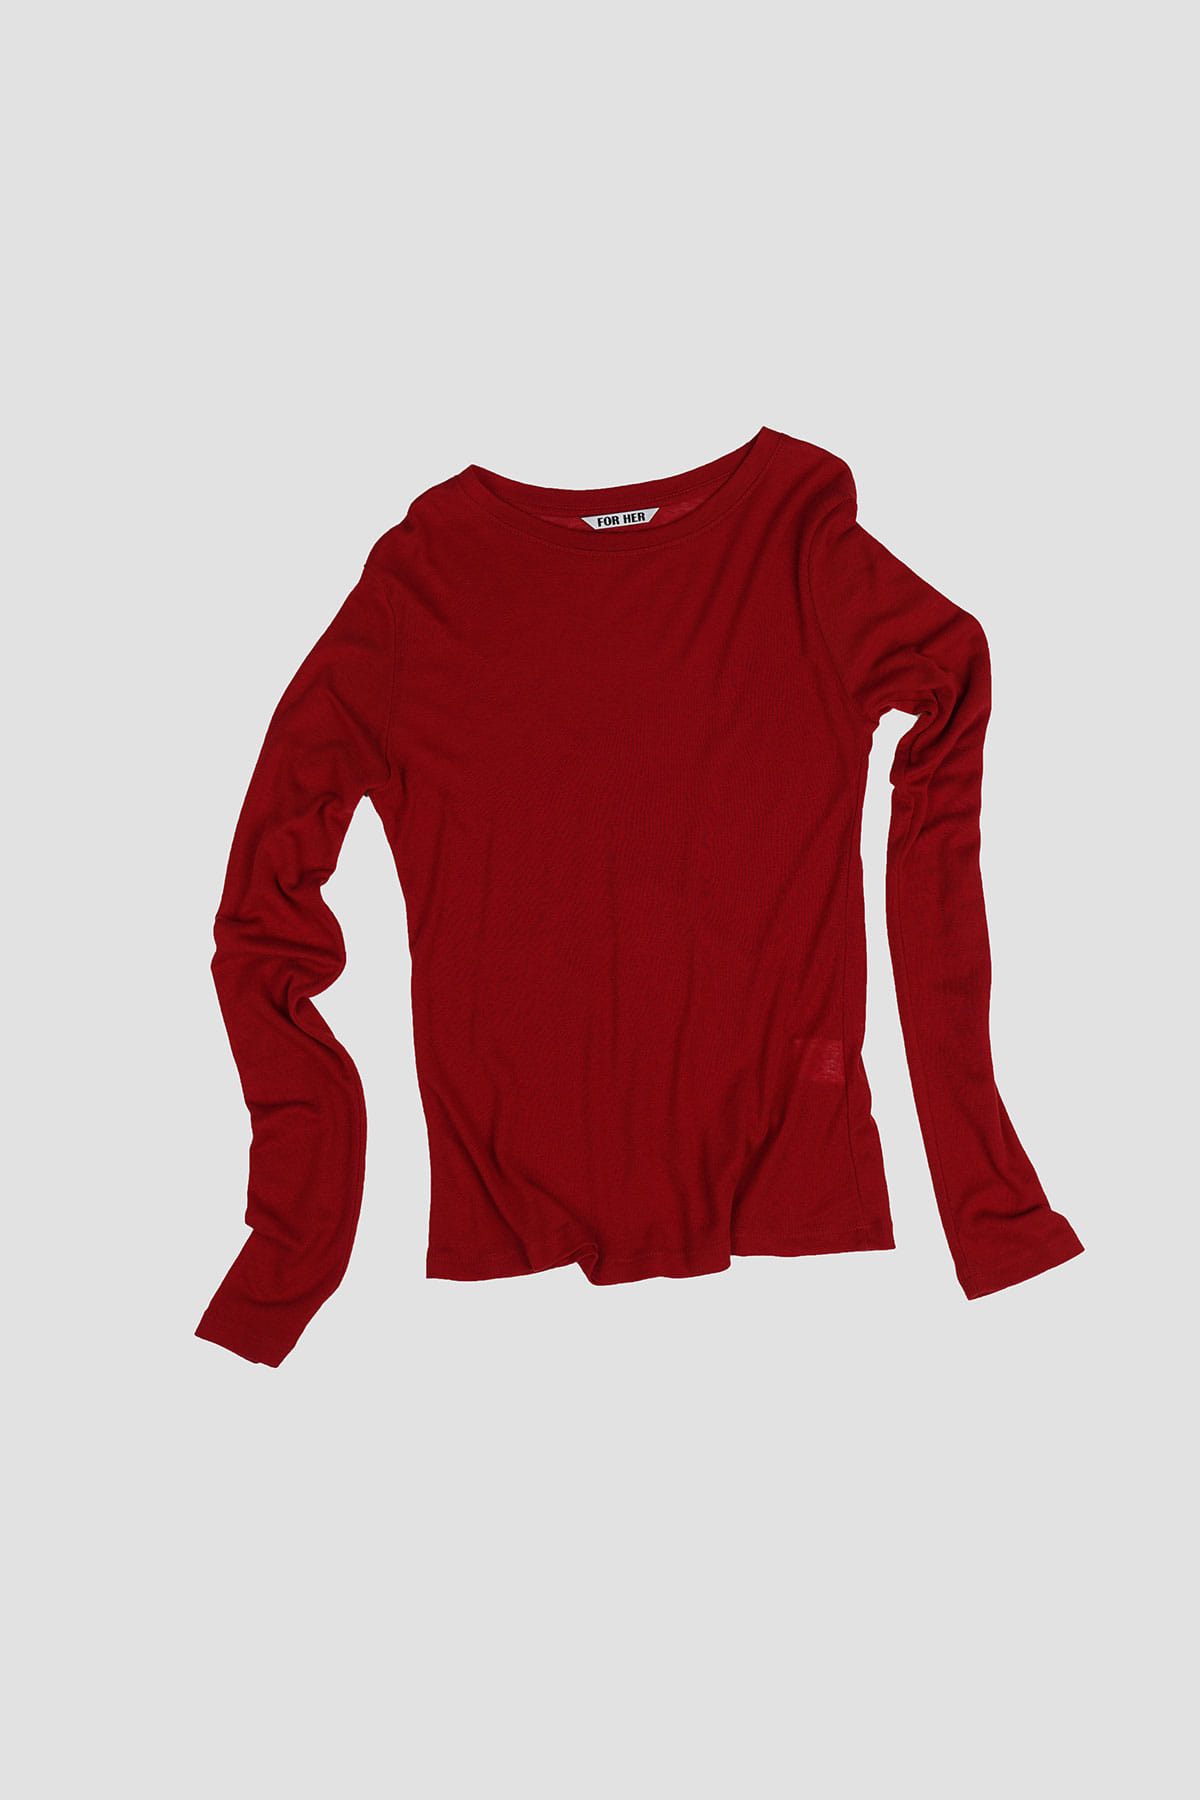 FOR HER SOFT LONG SLEEVE TOP (RED) 7차 2/9 예약배송